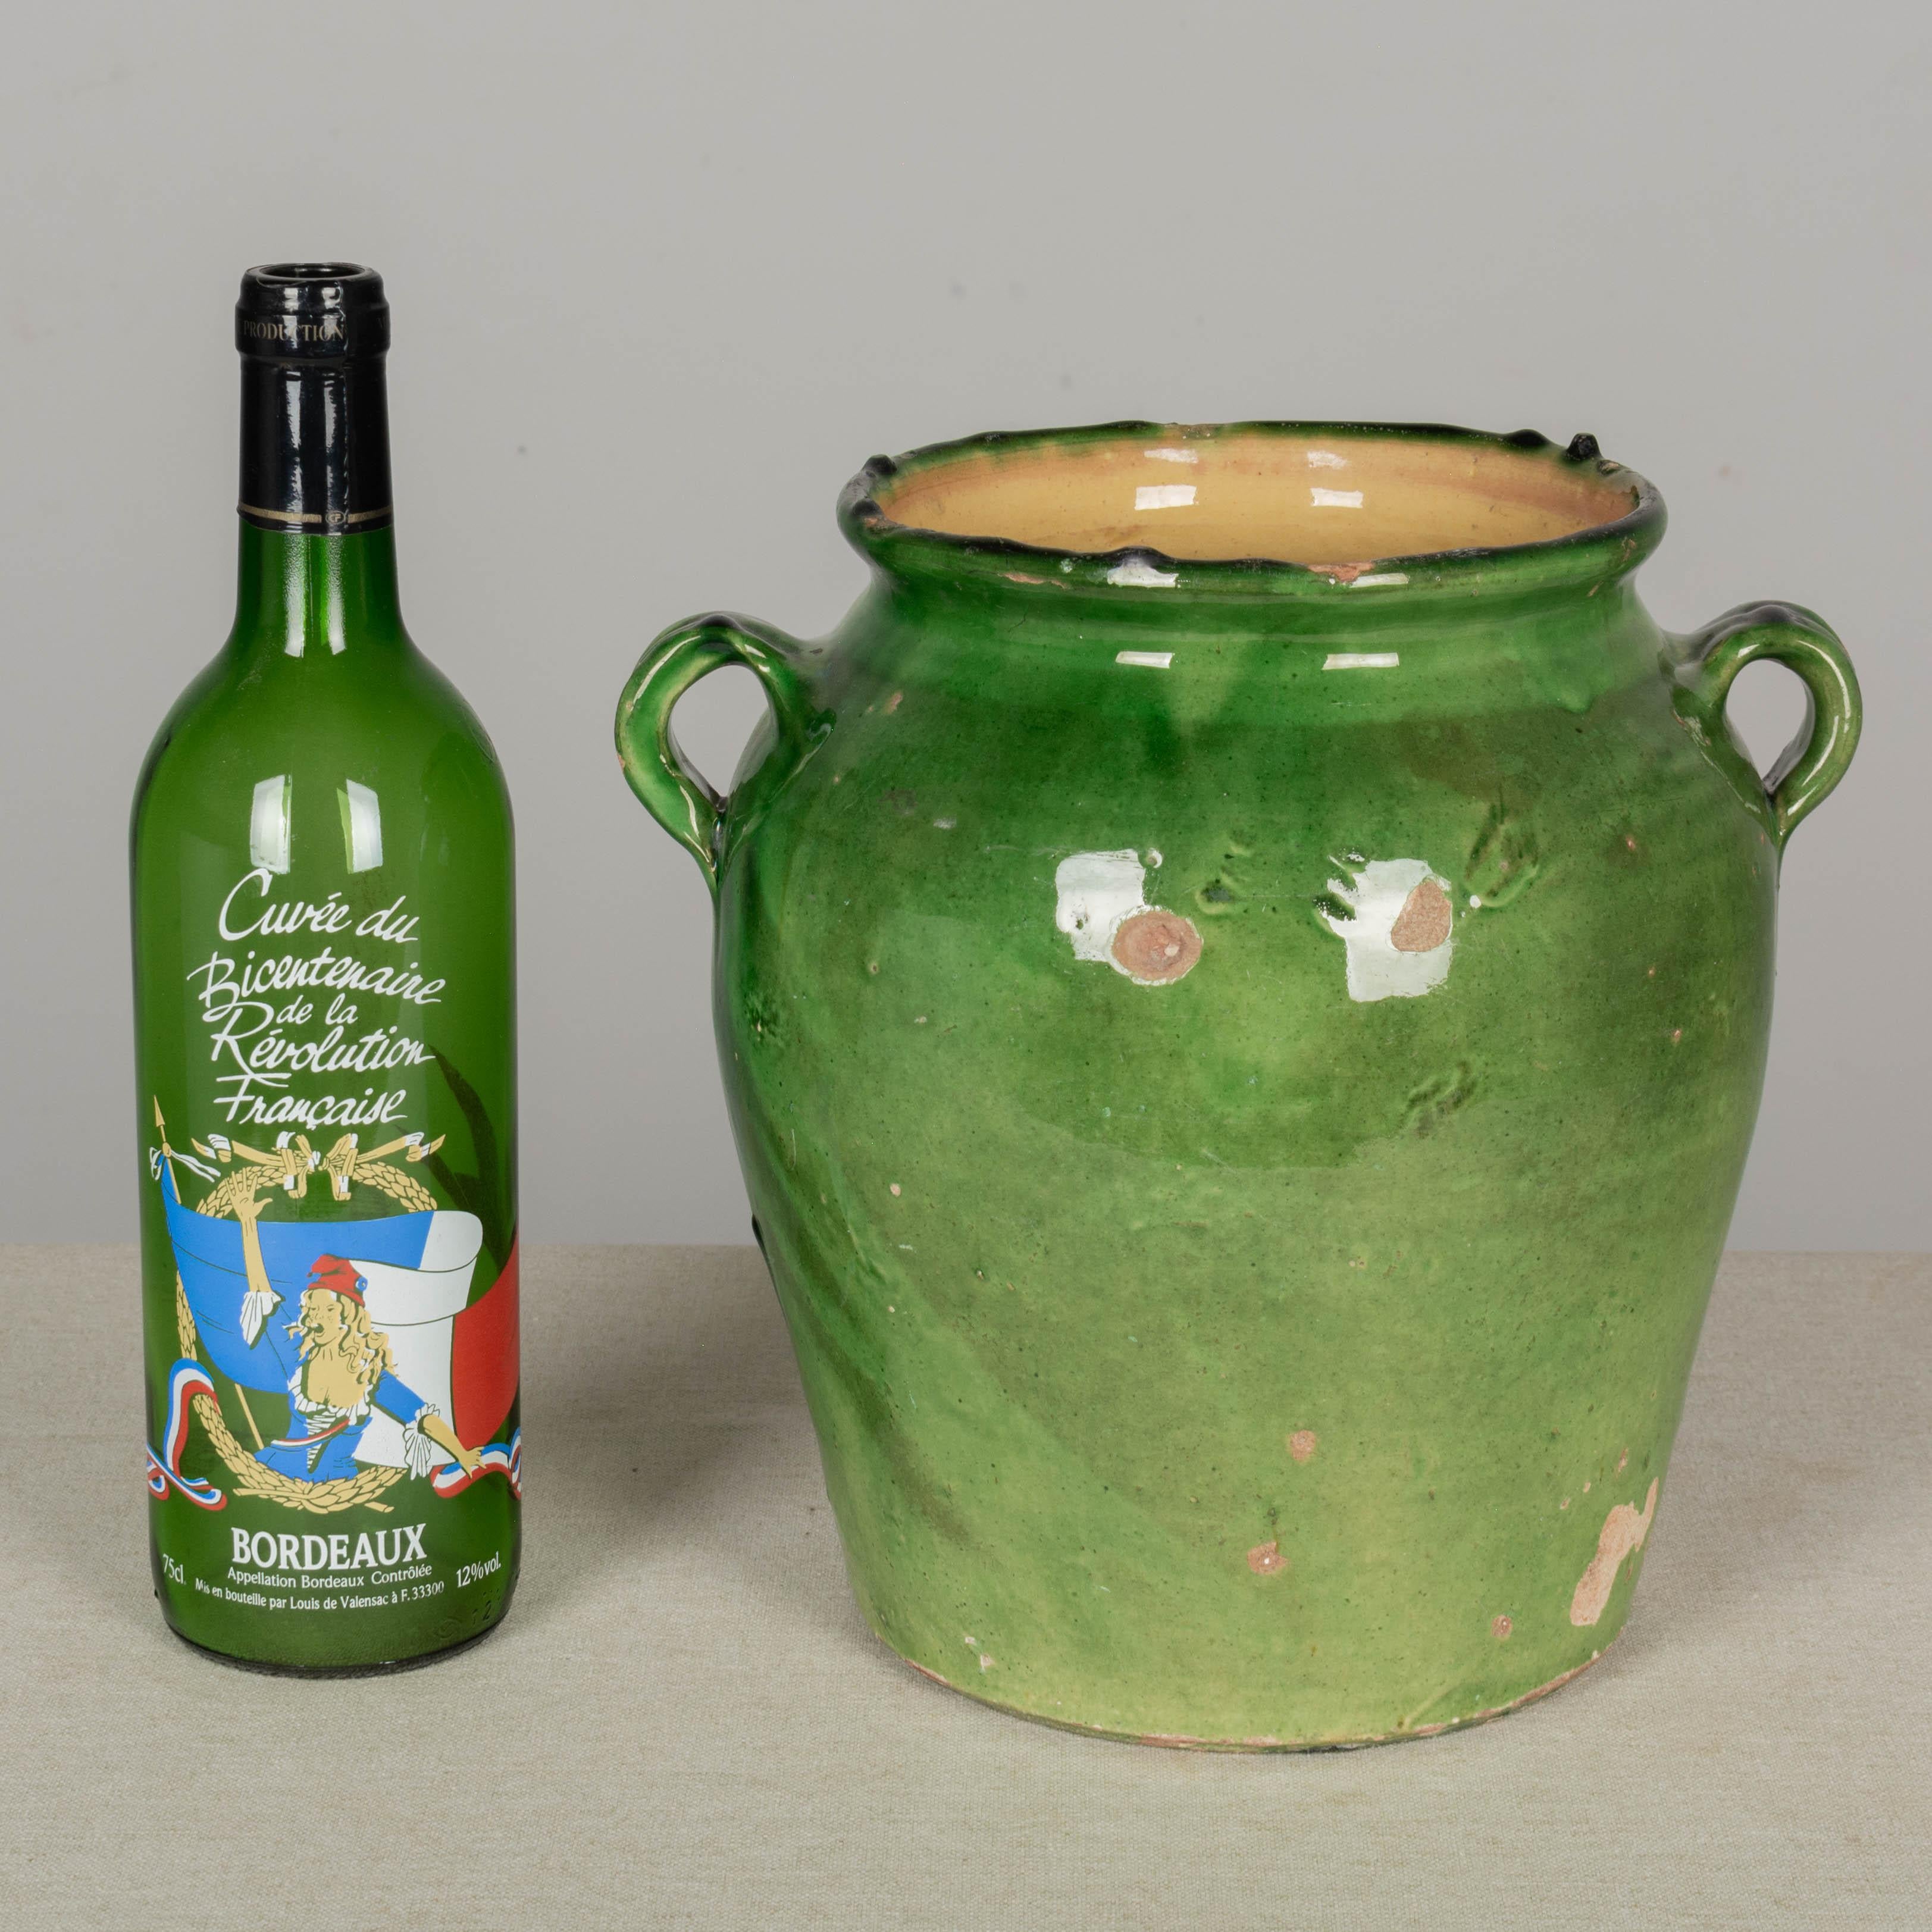 A terracotta earthenware pot from the Southwest of France with green glaze and yellow interior. Minor chips and losses to glaze. These ordinary earthenware vessels were once used daily in the French country home and have beautiful rustic glazes of